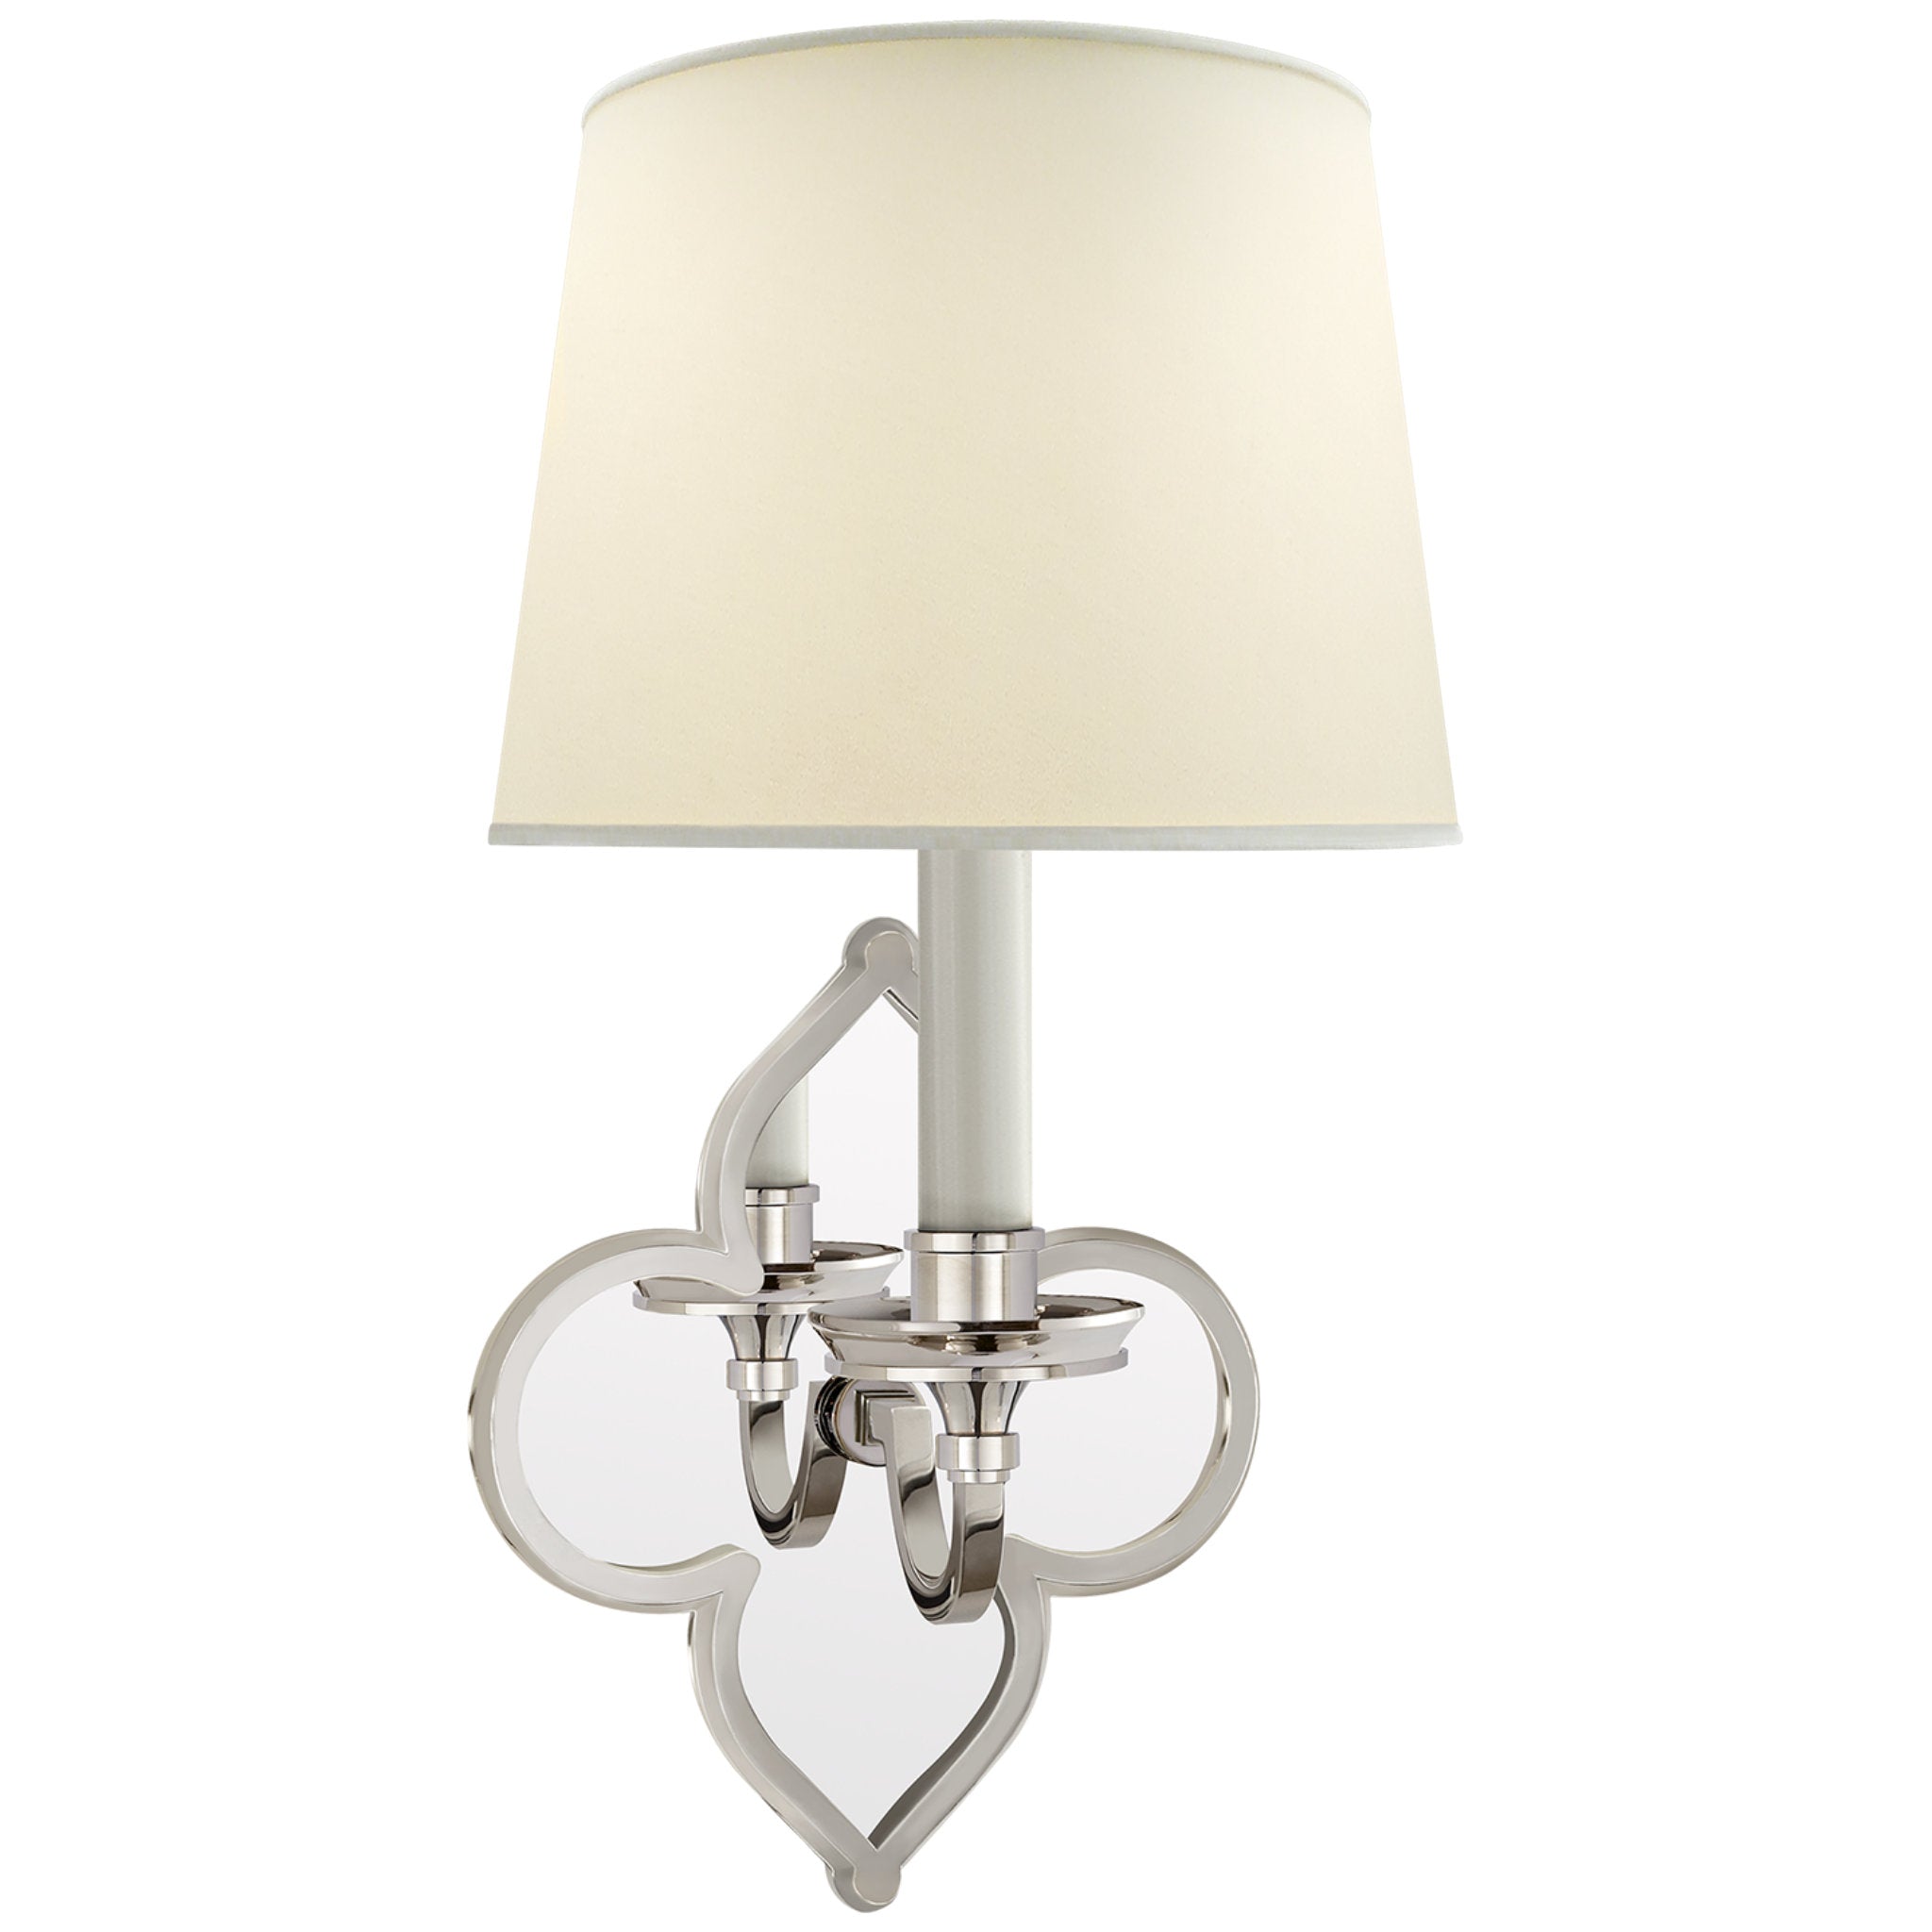 Alexa Hampton Lana Single Sconce in Polished Nickel and Mirror with Natural Percale Shade